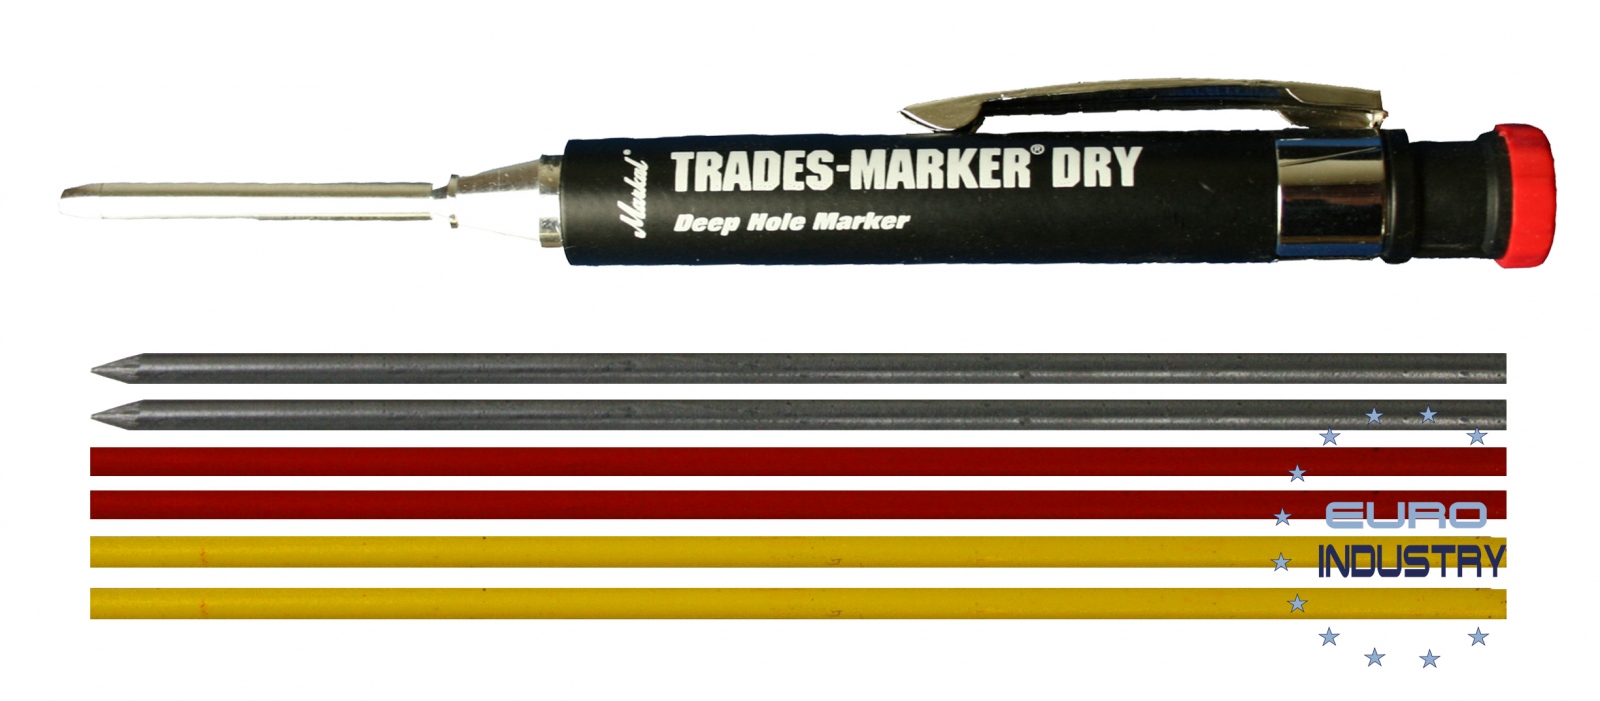 pics/Markal/E.I.S. Copyright/markal-trades-marker-dry-deep-hole-and-mix-mines-refill-pack2.jpg